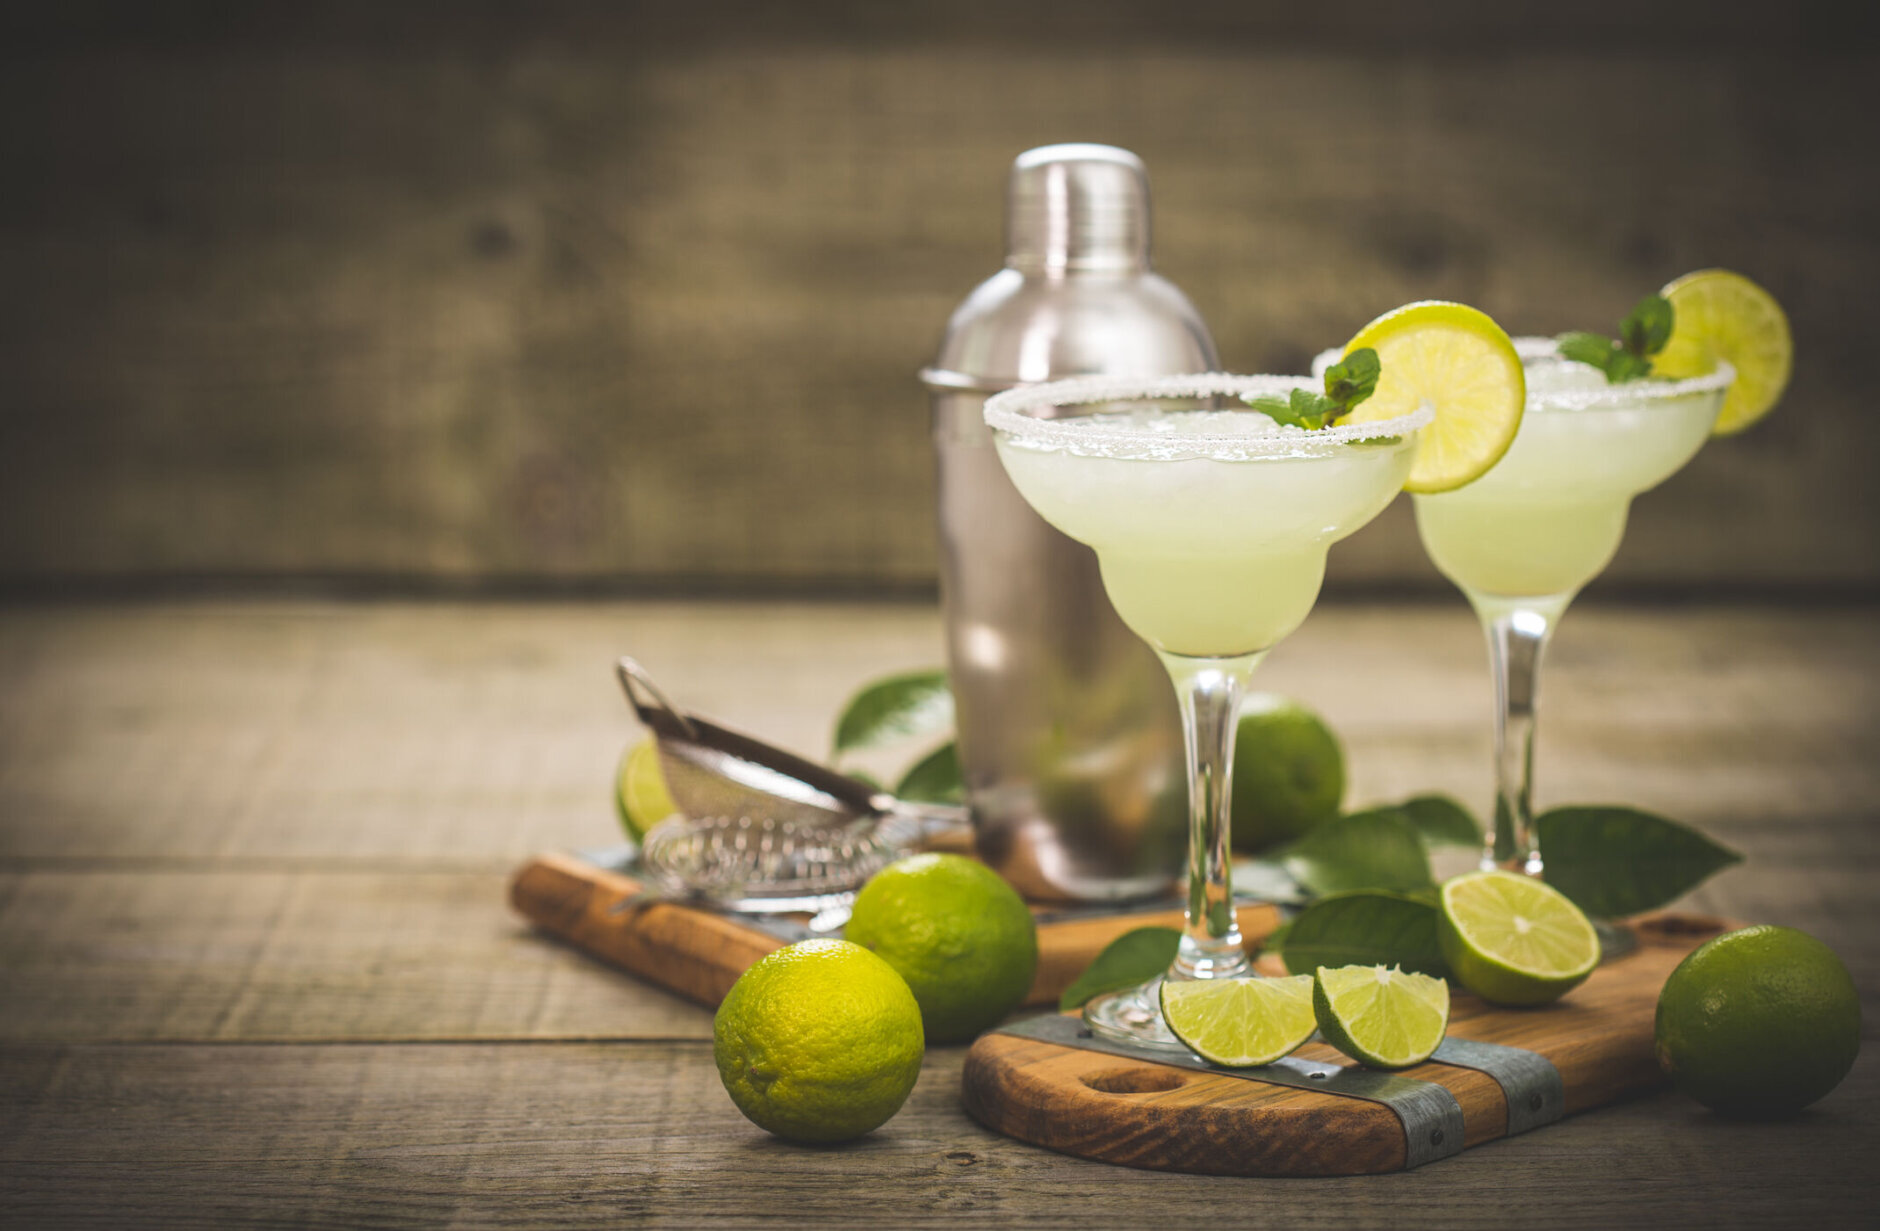 <h3>Best Place To Get a Drink</h3>
<h4><a href="https://www.gringosandmariachis.com/" target="_blank" rel="noopener">Gringos &amp; Mariachis</a></h4>
<p><em>Maryland locations in Bethesda and Potomac</em></p>
<p>Runner-up: <a href="https://www.thelibertytavern.com/" target="_blank" rel="noopener">The Liberty Tavern</a></p>
<p><a href="https://wtop.com/business-finance/2022/08/wtop-top-10-2022-best-place-to-get-a-drink/" target="_blank" rel="noopener">See the TOP 10 places to get a drink</a>.</p>
